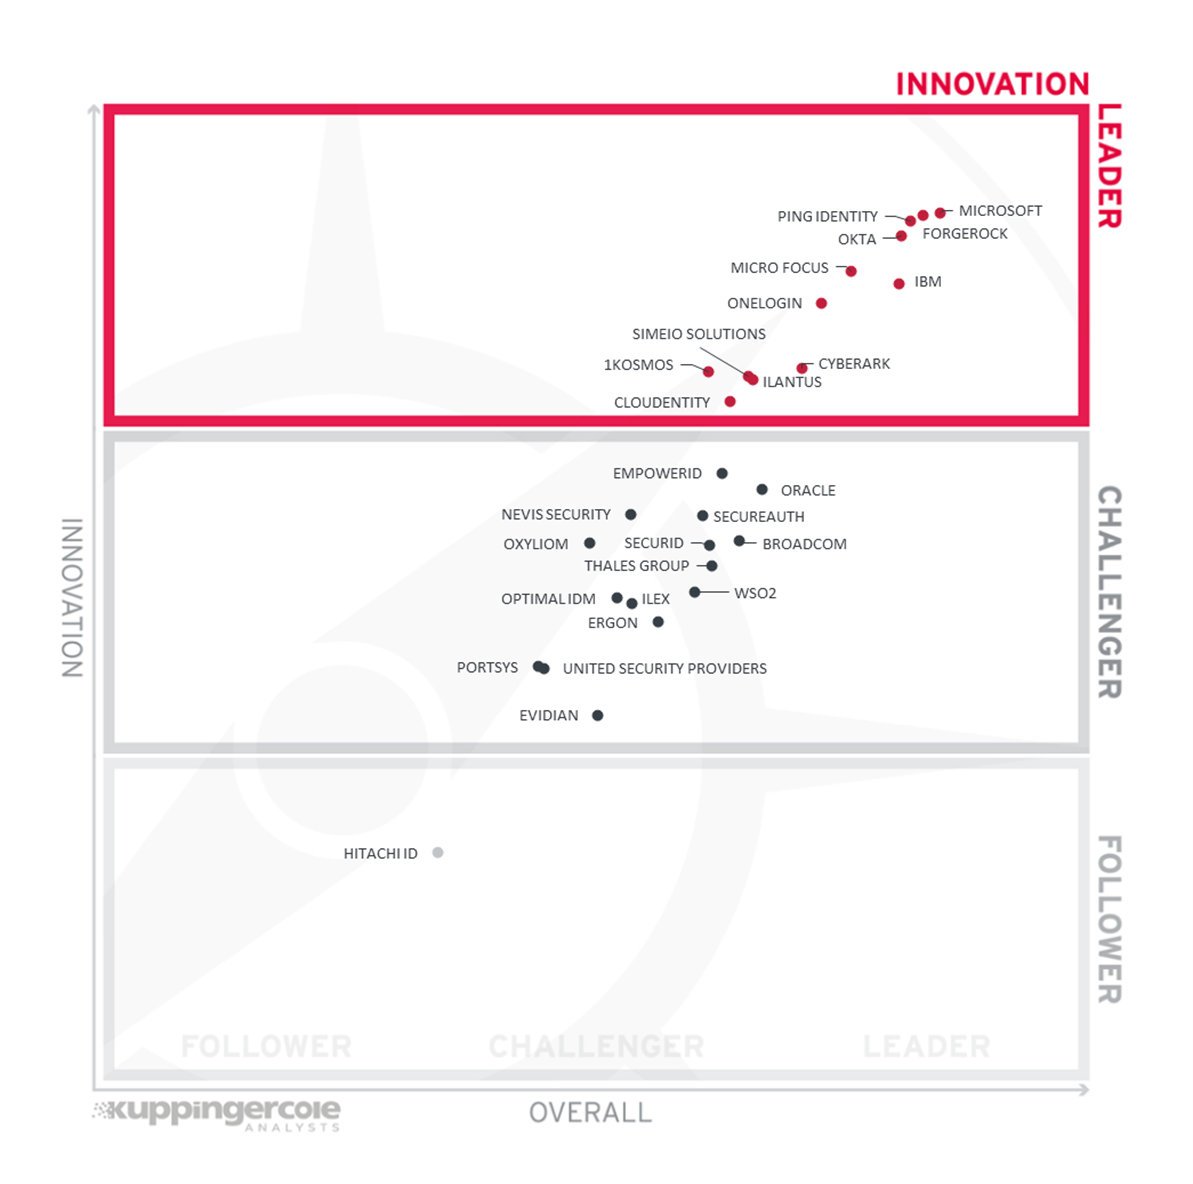 Innovation Leaders in the Access Management market segment